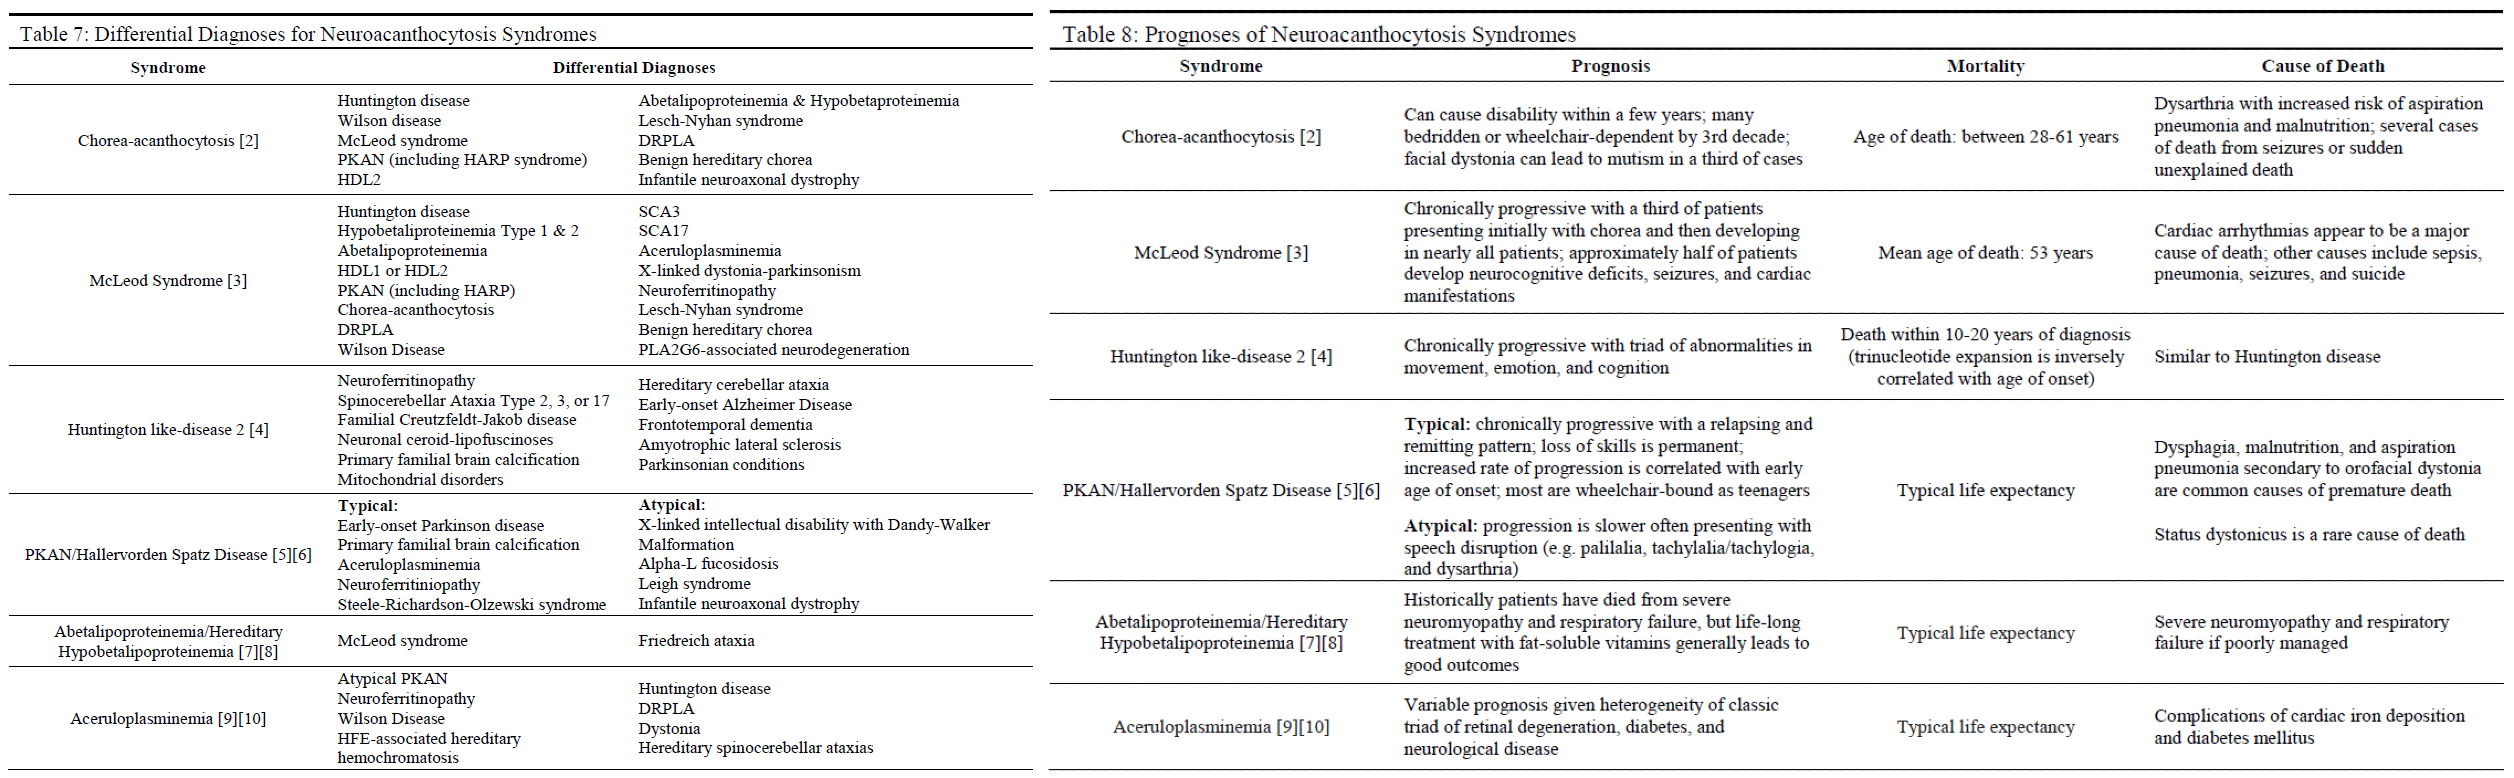 Table 7: Differential Diagnoses for Neuroacanthocytosis Syndromes
Table 8: Prognoses of Neuroacanthocytosis Syndromes 